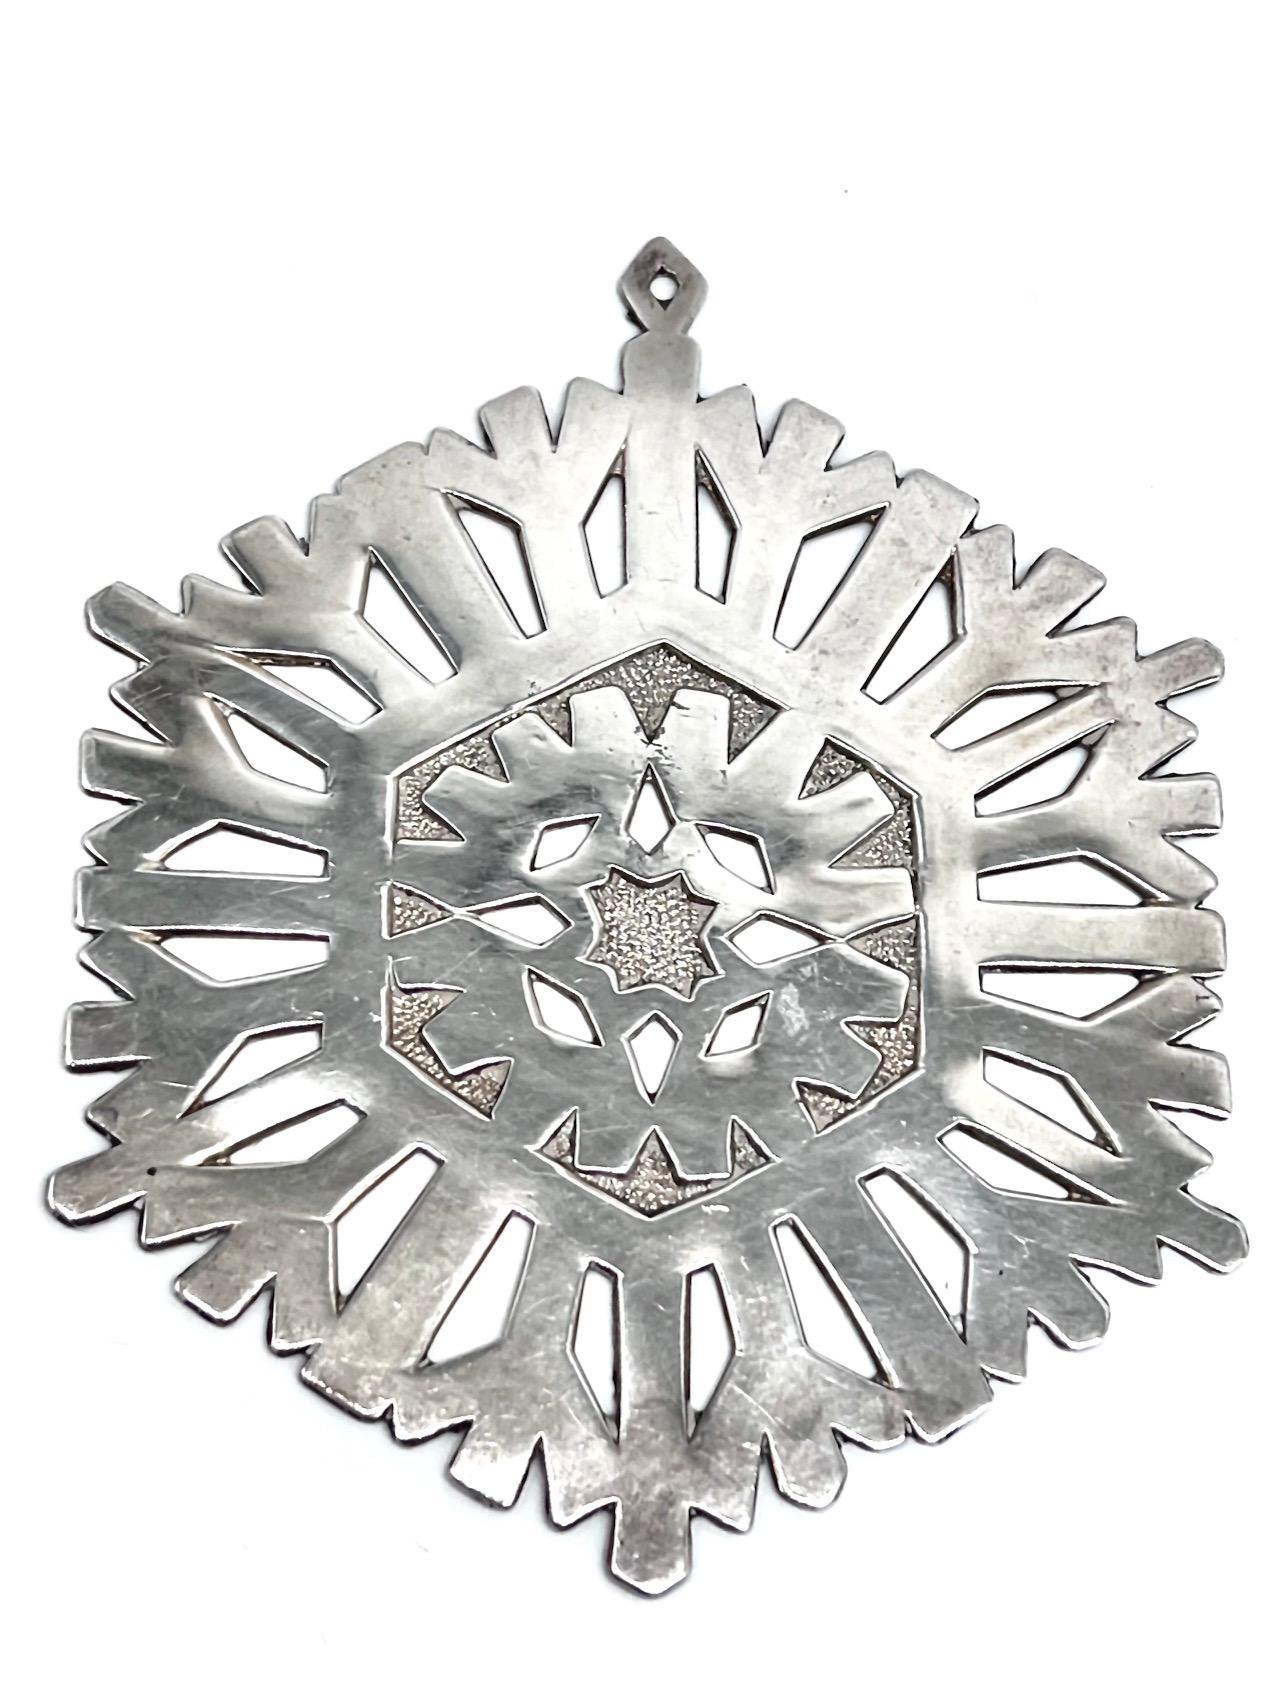 Set of 9 American Sterling Silver Christmas Snowflake Ornaments 2